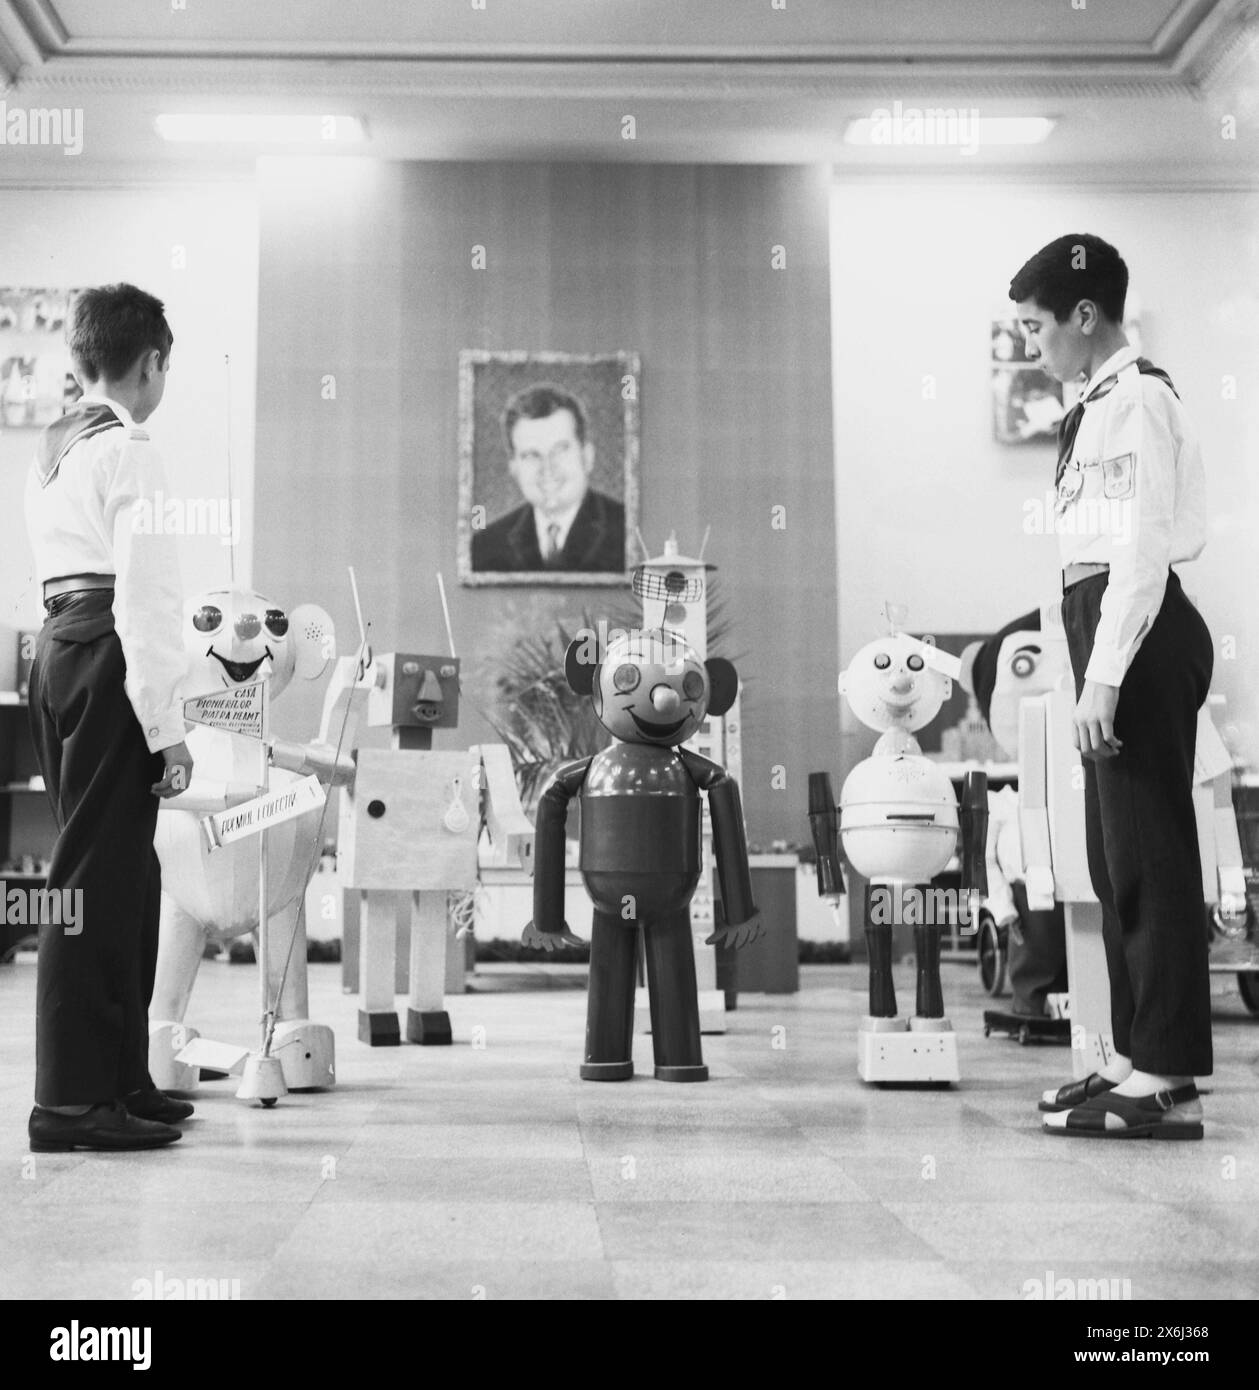 Socialist Republic of Romania in the 1970s.  'Pioneers'- student in elementary/ middle school wearing the standardized uniform. Winners of a technical competition at 'The Pioneer's House' displaying their work. Stock Photo